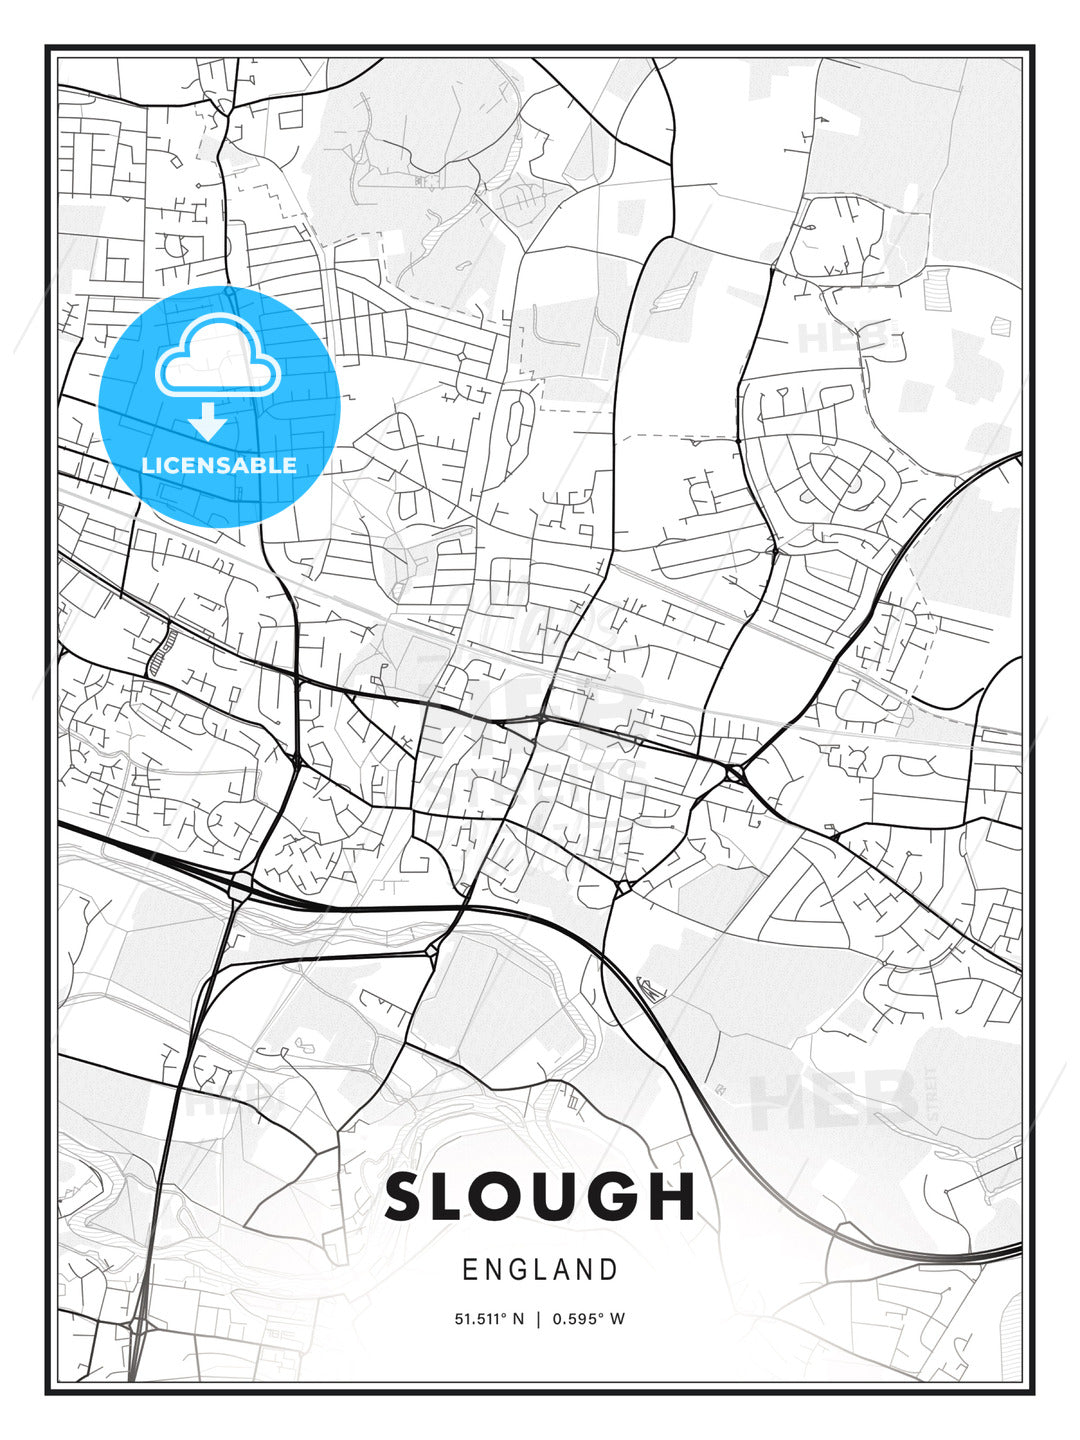 Slough, England, Modern Print Template in Various Formats - HEBSTREITS Sketches